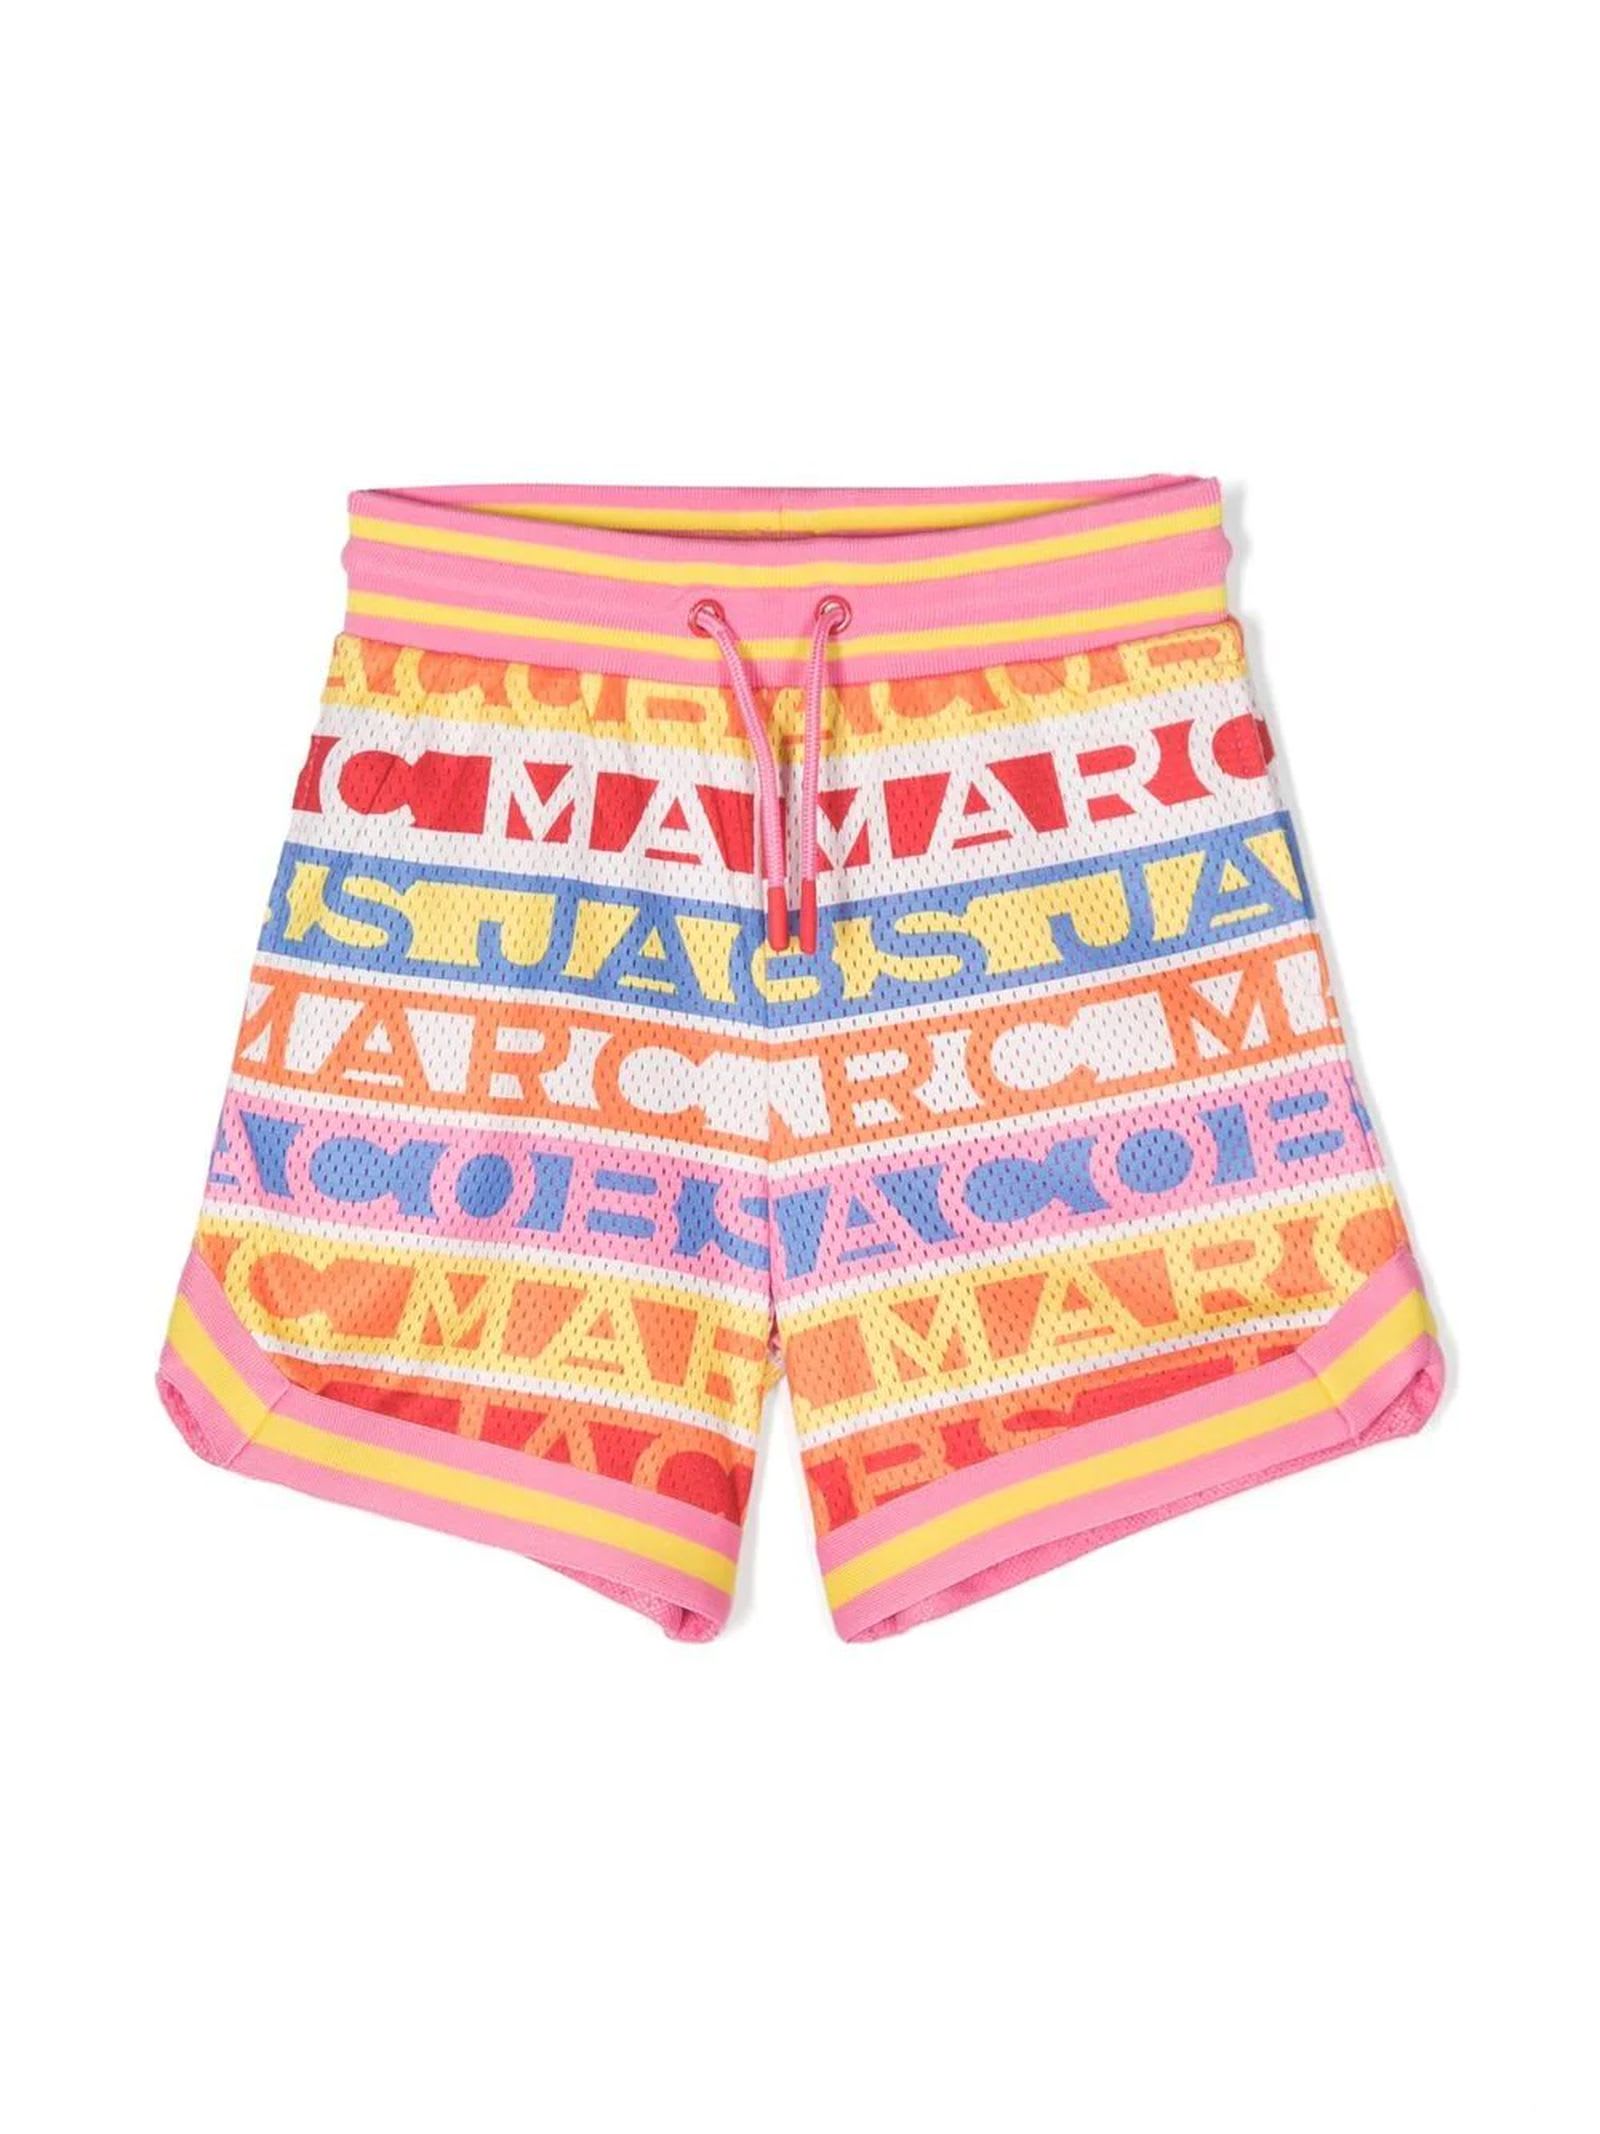 MARC JACOBS PINK POLYESTER SHORTS